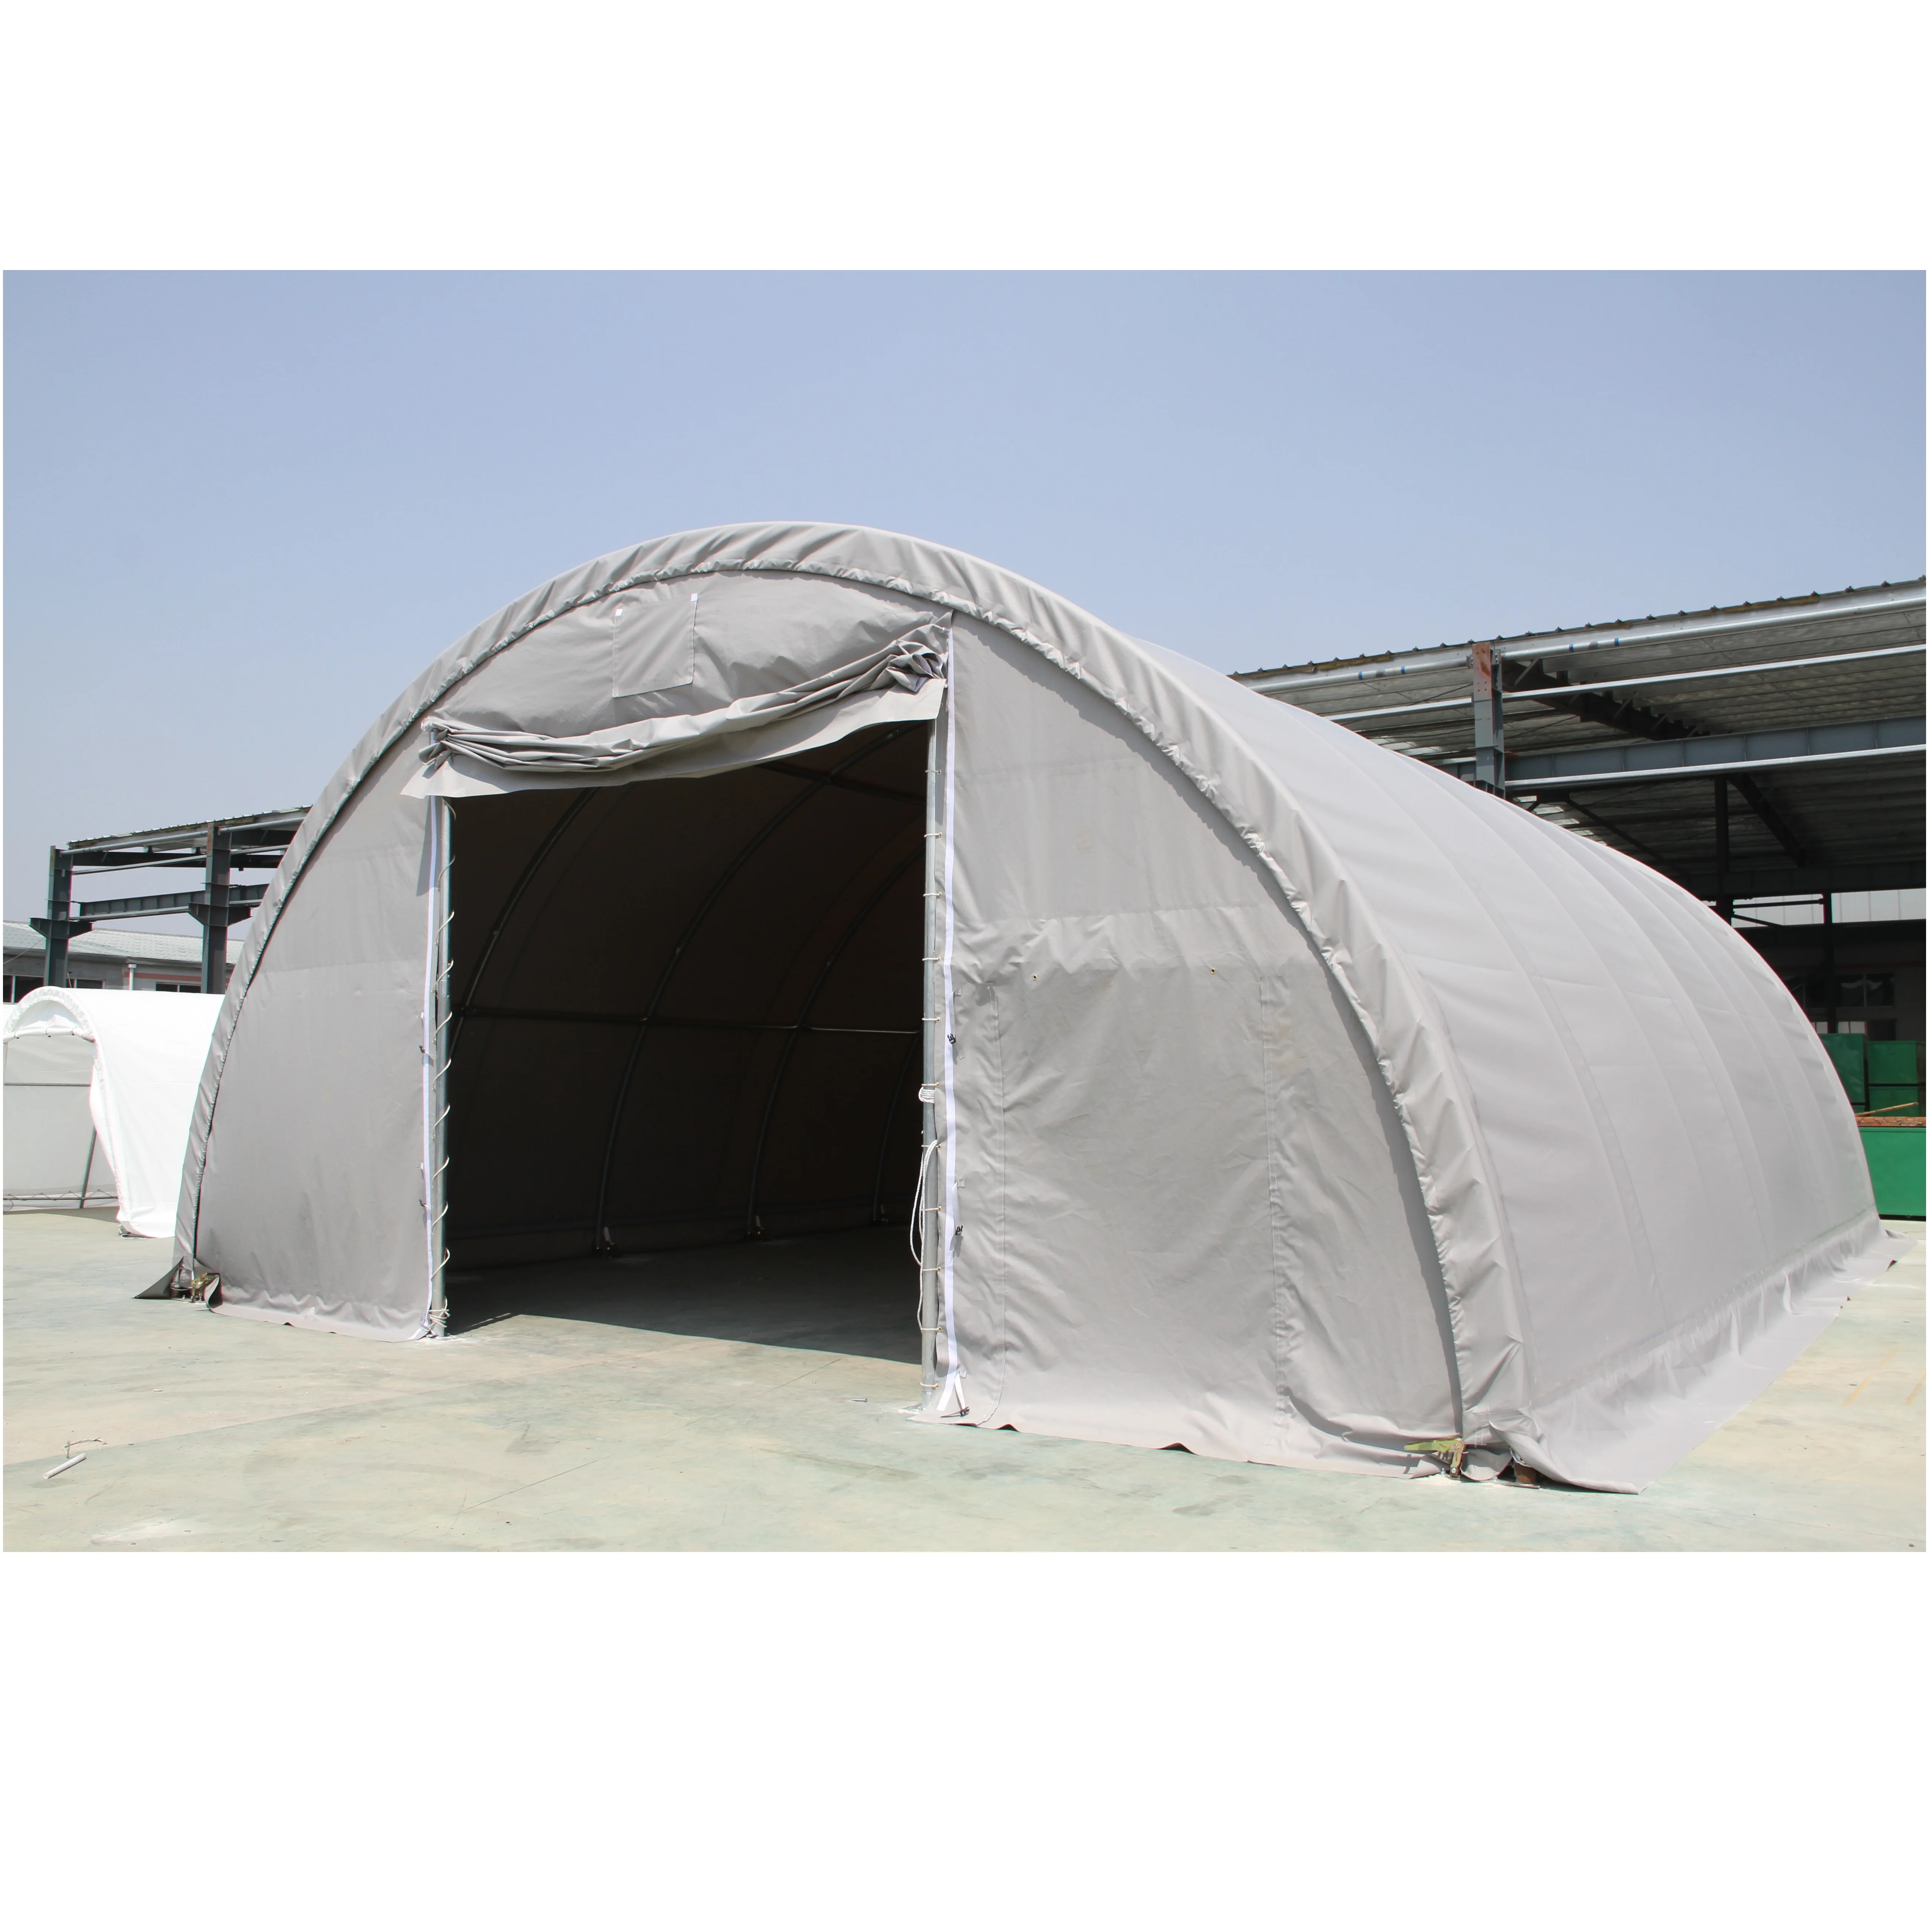 Suihe Storage Fabric Building Tent S304015R